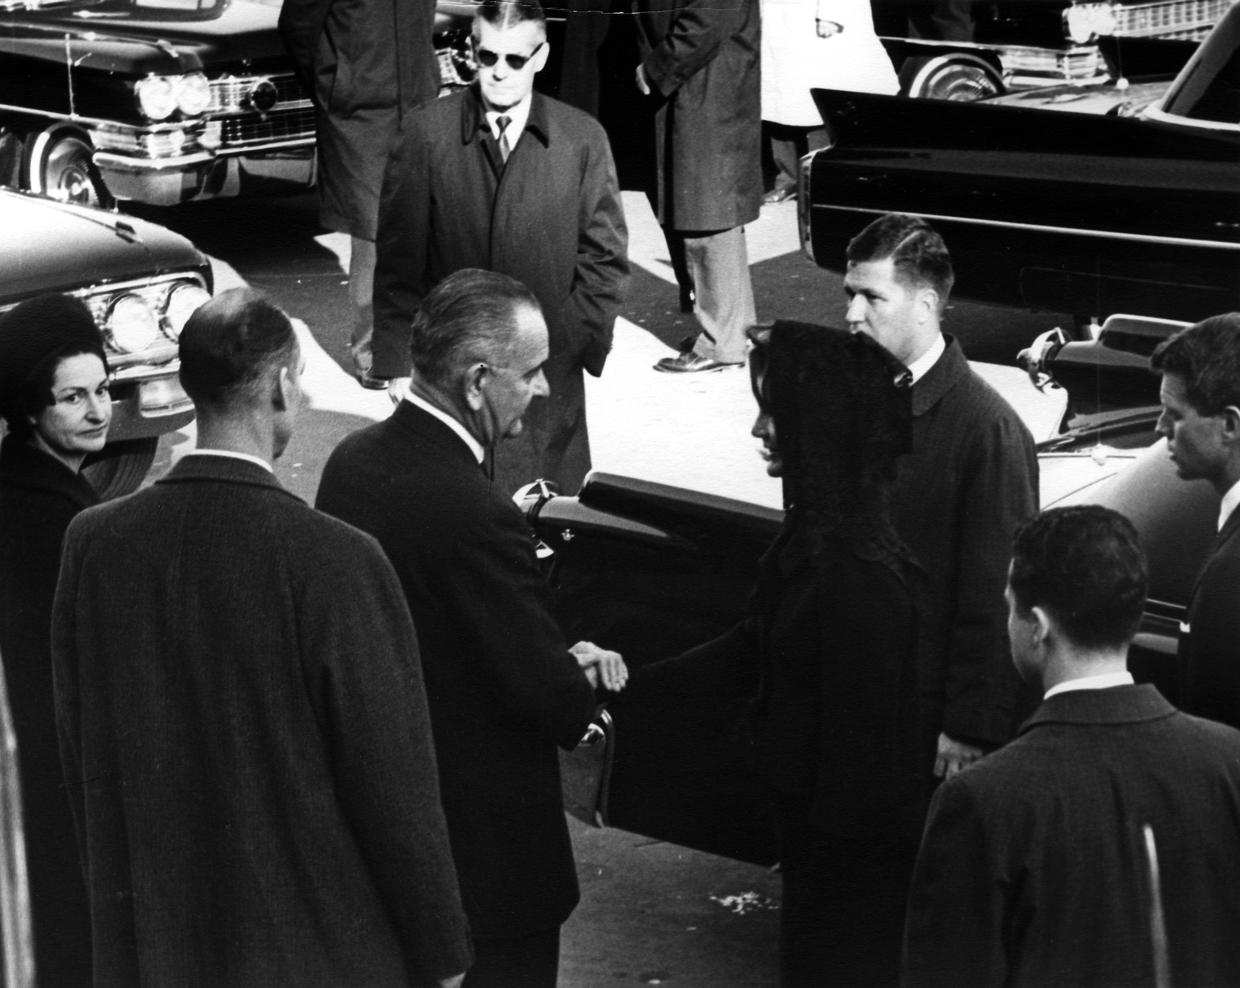 The Funeral Of John F. Kennedy